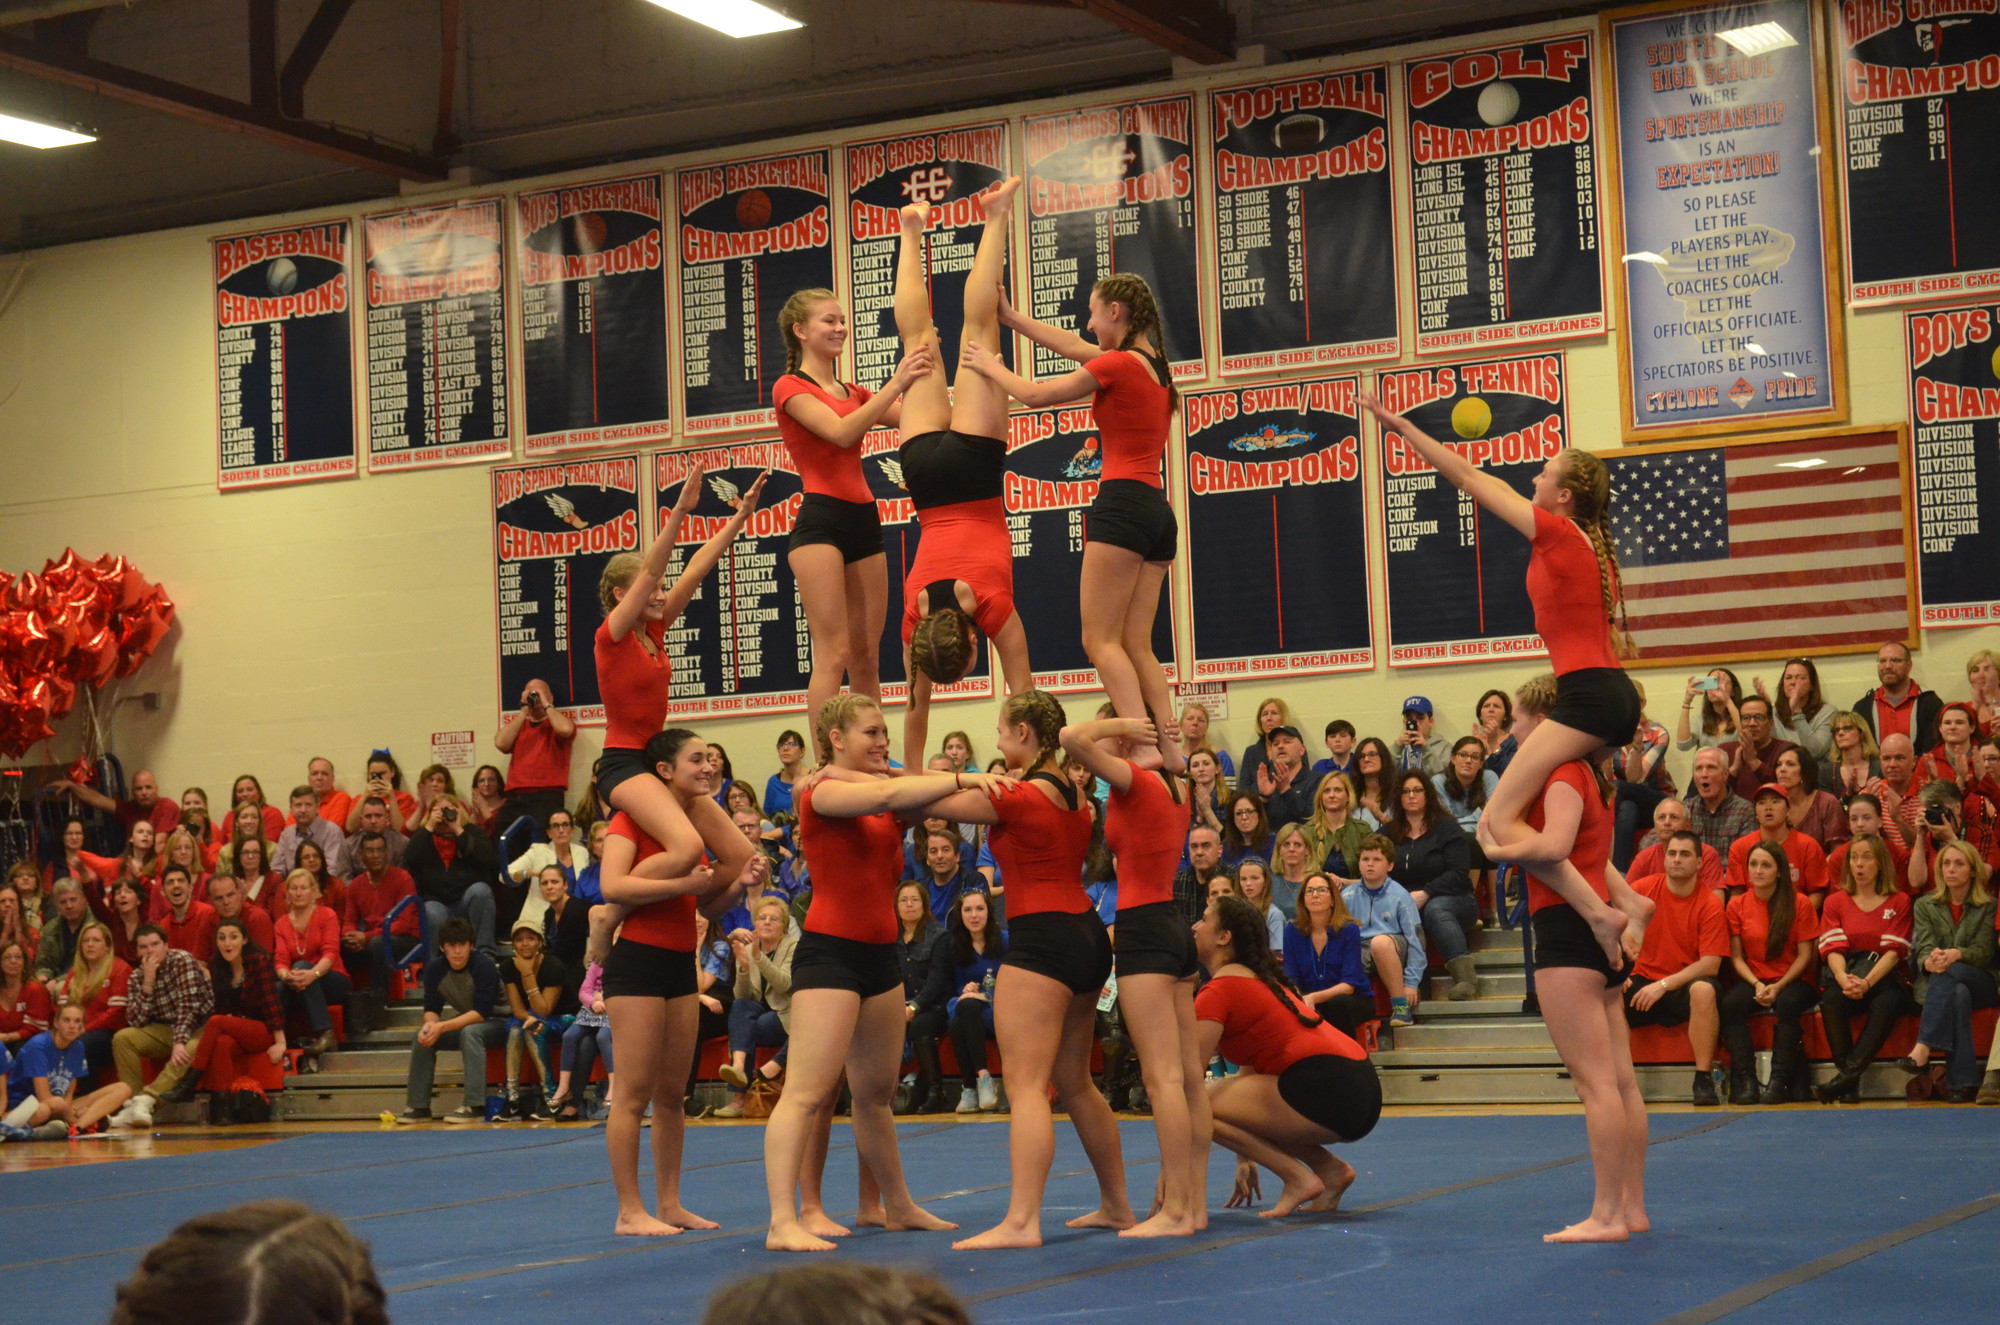 Red put on a fantastic tumbling display.